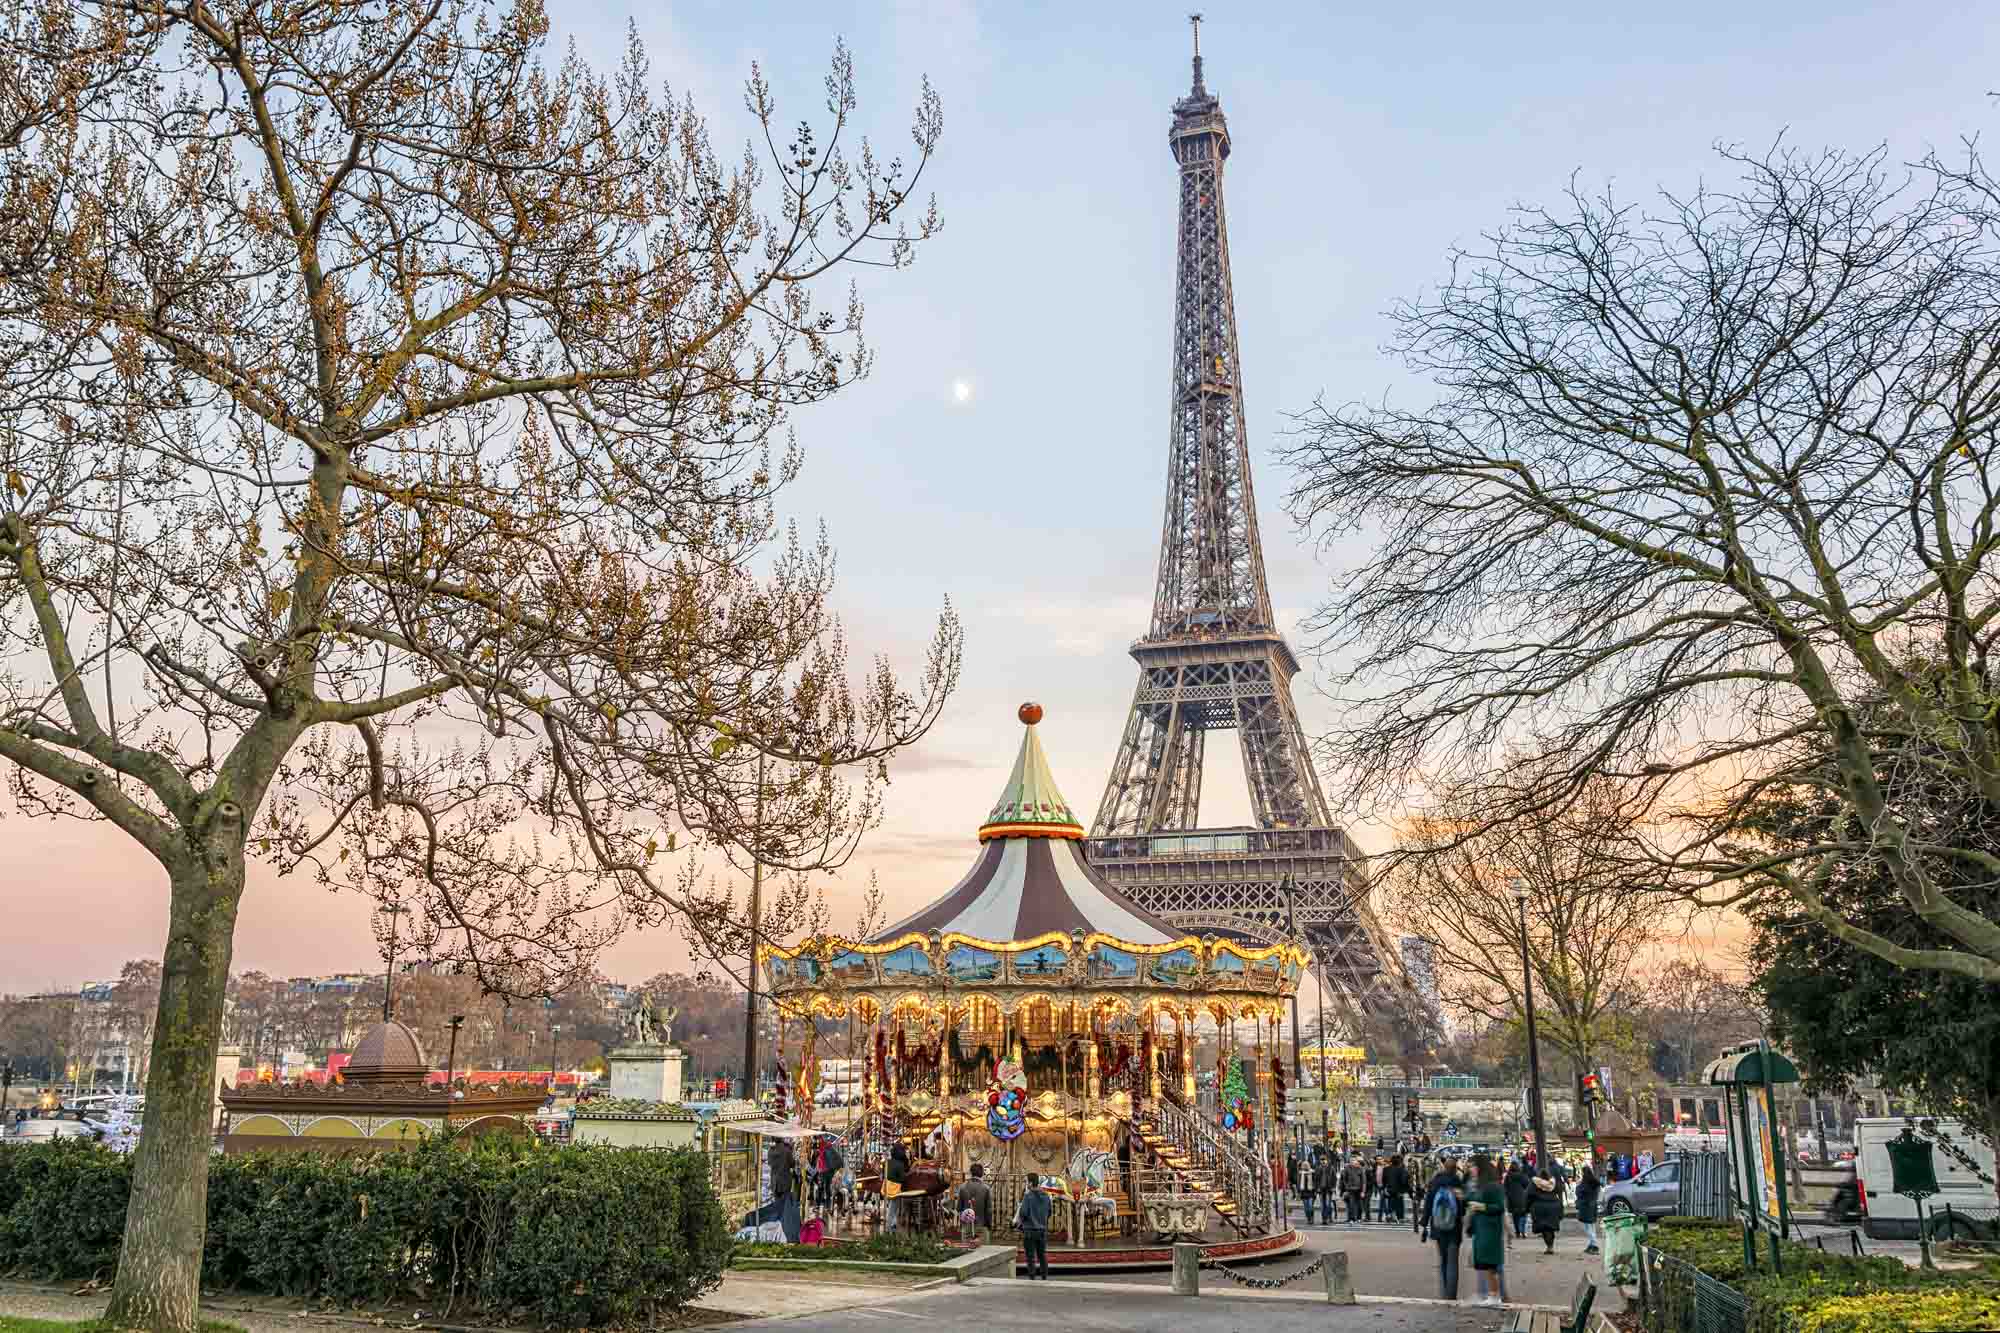 Eiffel Tower and vintage carousel in Paris at sunset during winter